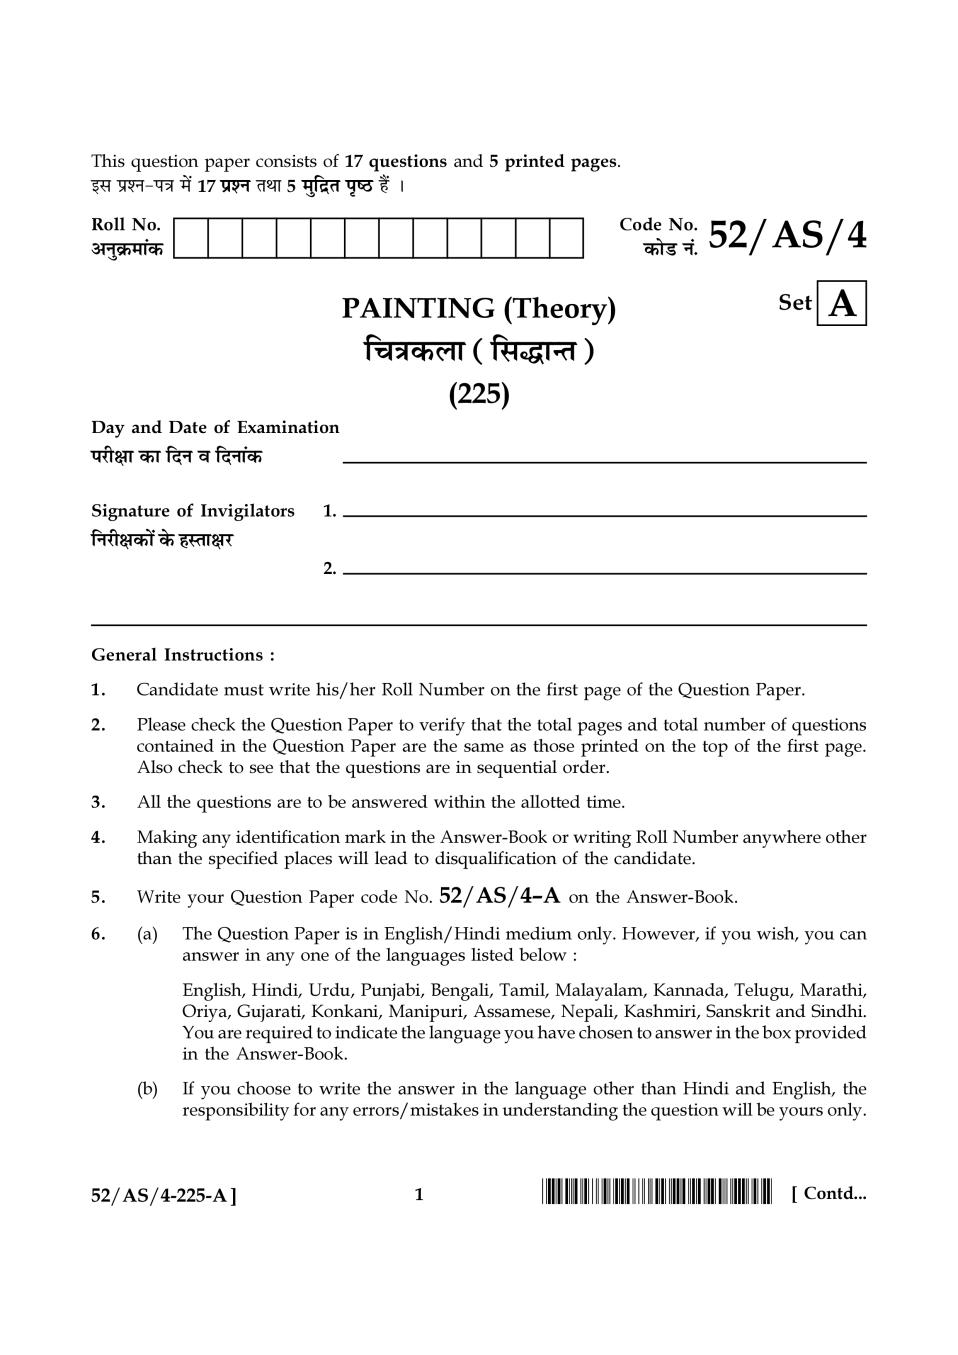 NIOS Class 10 Question Paper Apr 2016 - Painting Theory - Page 1